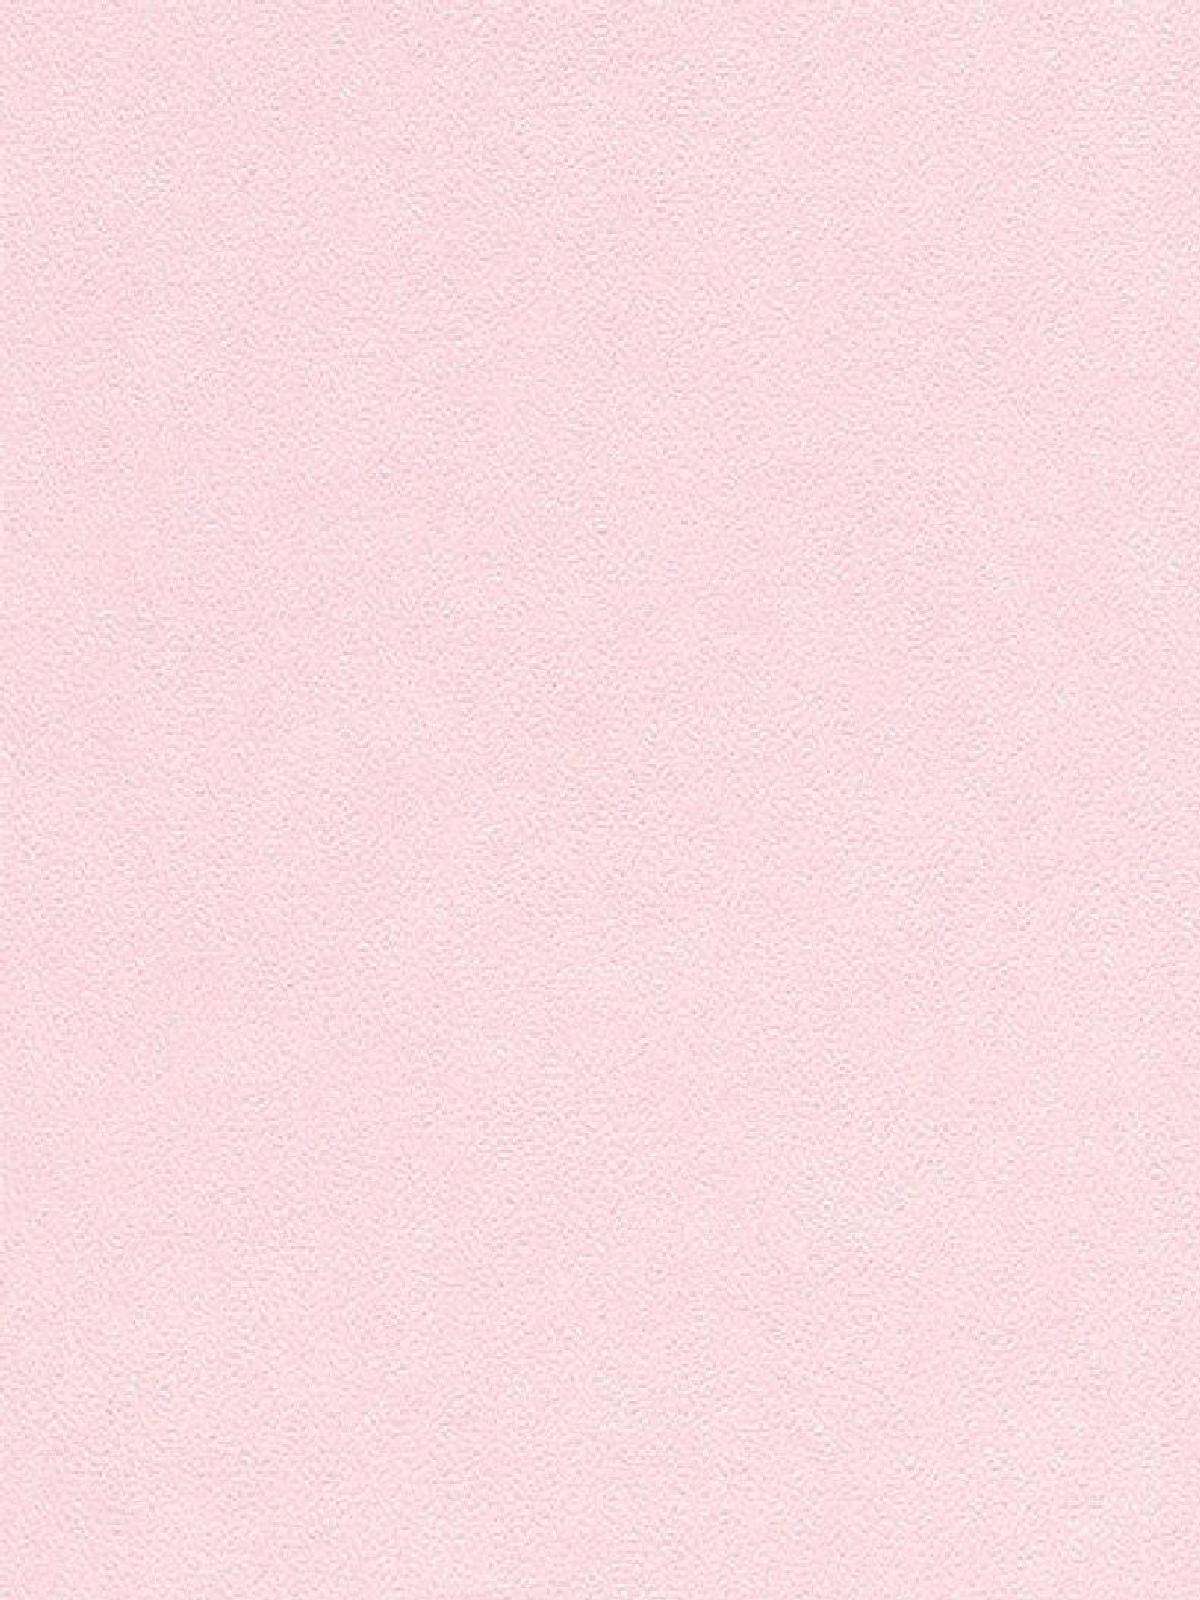 Gallery For Gt Soft Pink Background